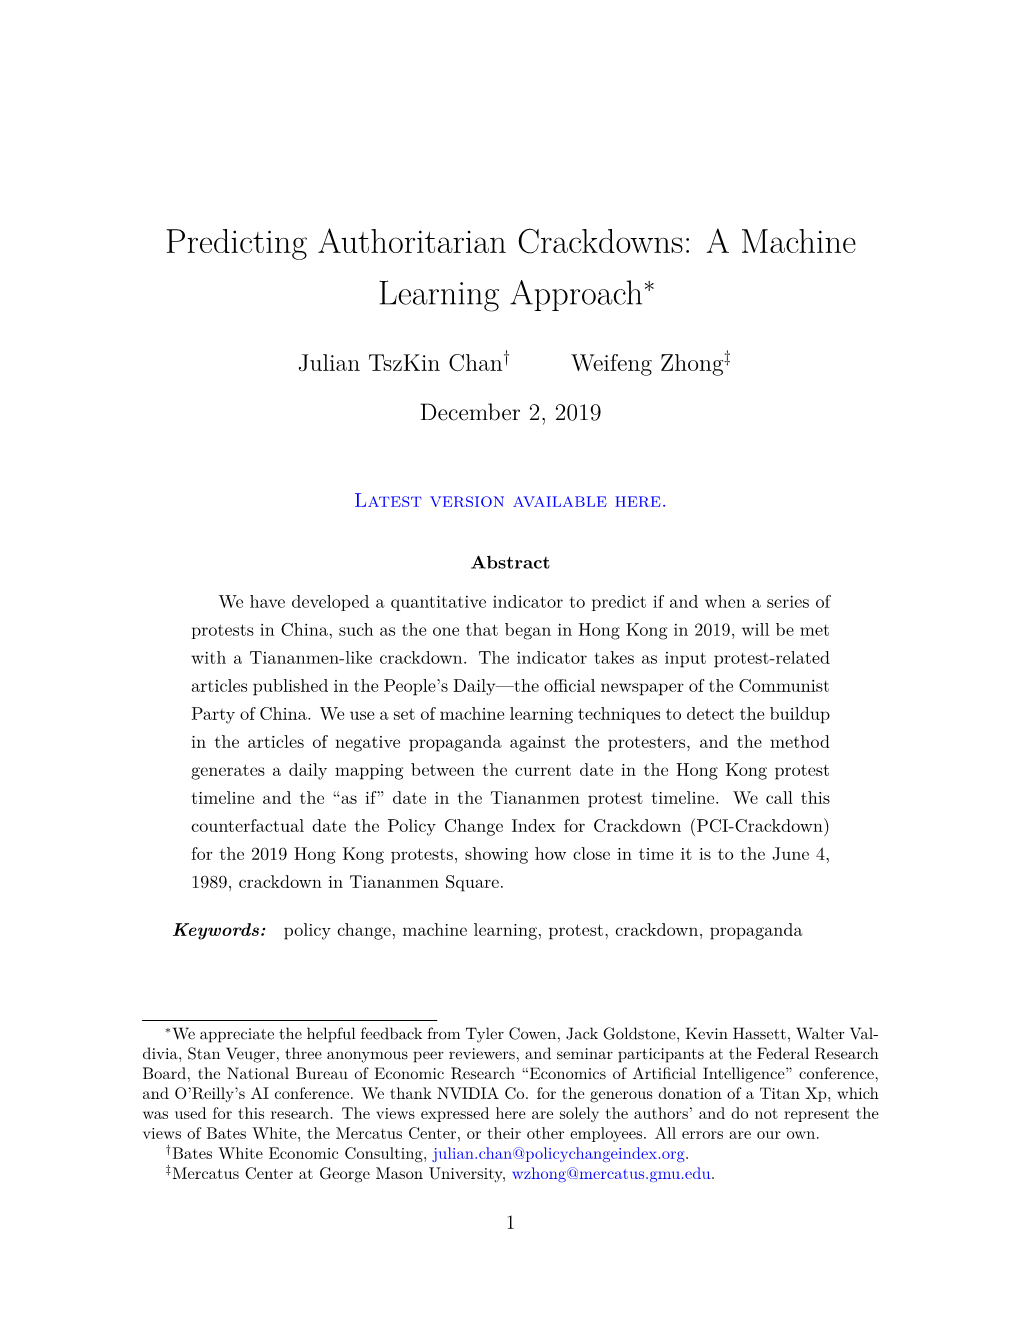 Predicting Authoritarian Crackdowns: a Machine Learning Approach∗